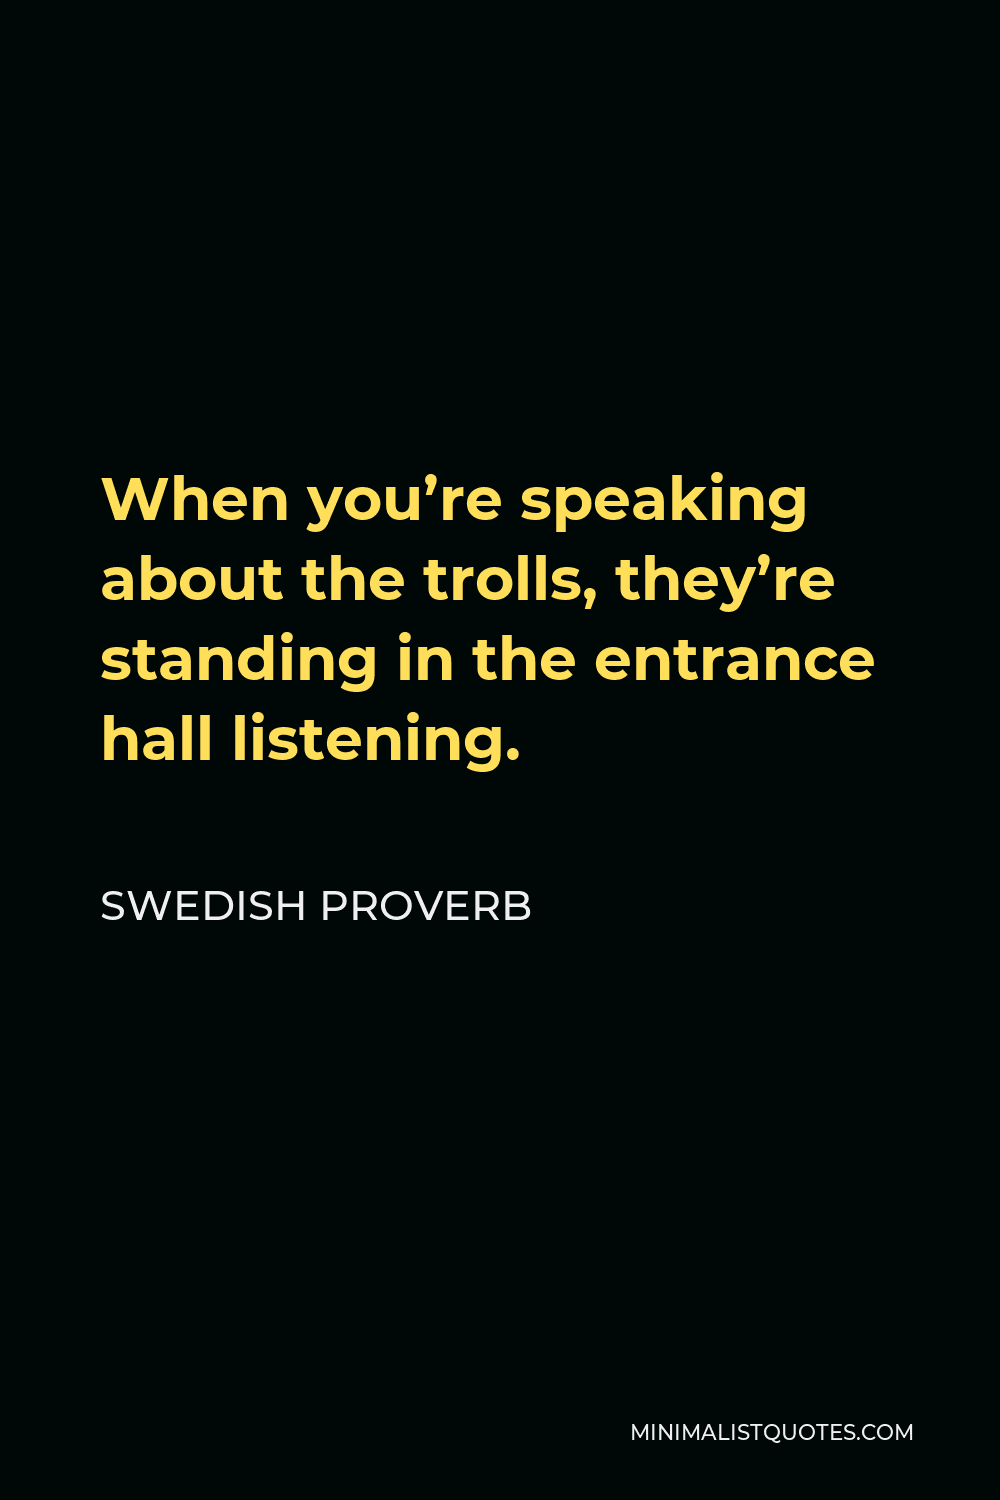 Swedish Proverb Quote - When you’re speaking about the trolls, they’re standing in the entrance hall listening.